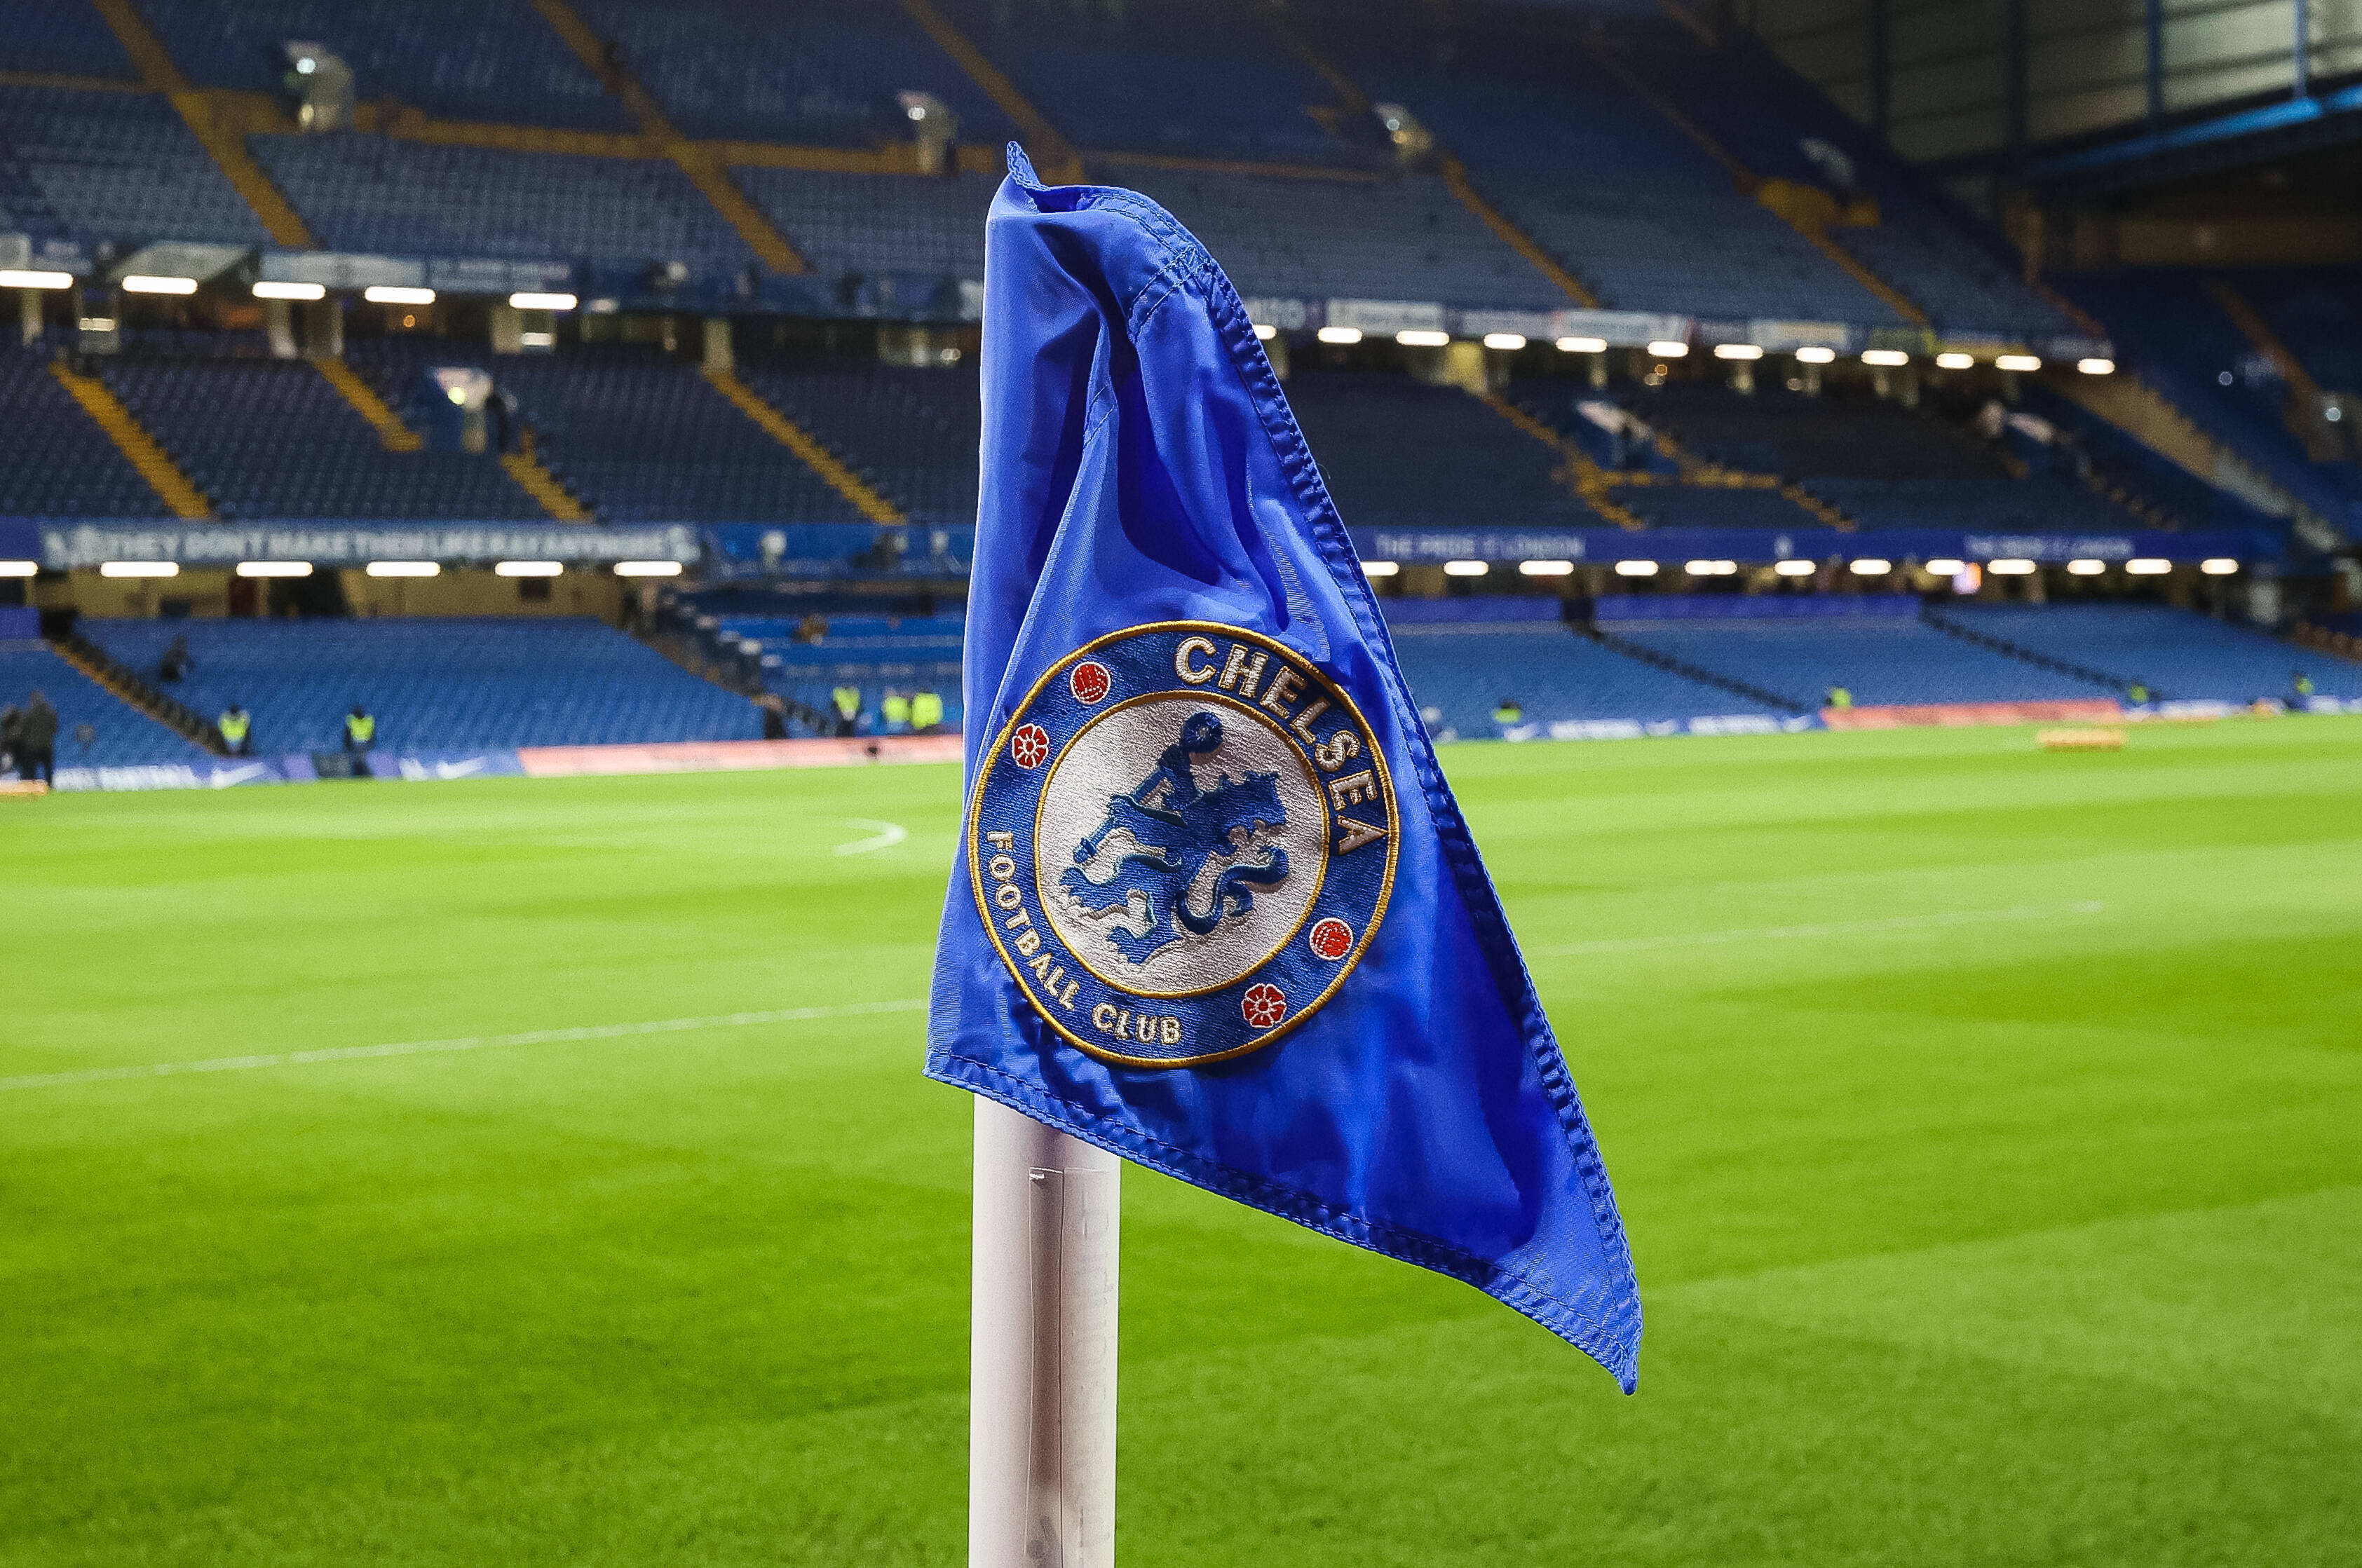 A general view of a Chelsea-branded corner flag at Stamford Bridge